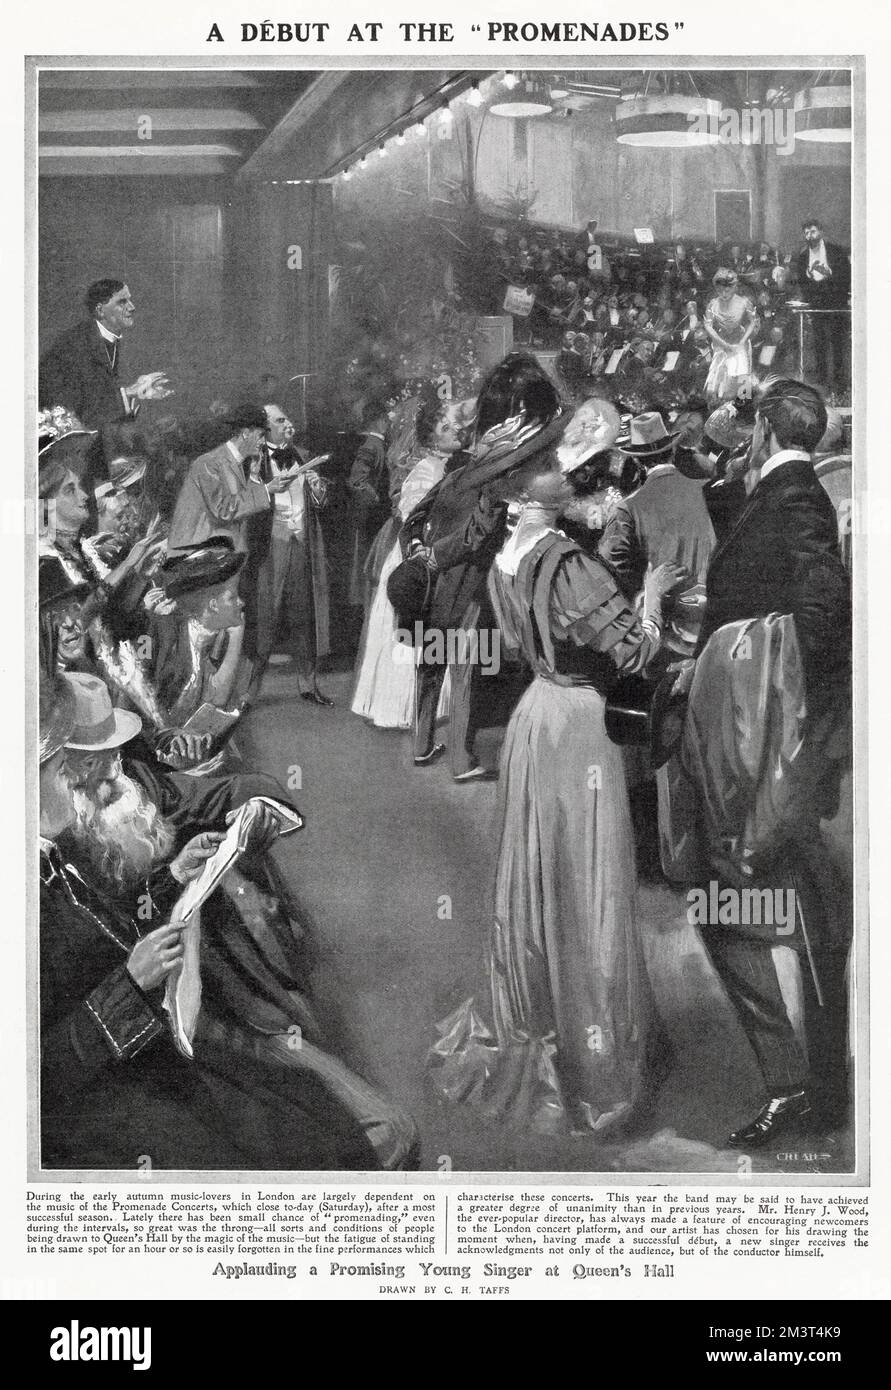 A debut at the Promenades (the Proms): the audience applauding a promising young singer at Queen's Hall in 1908. During the early autumn, music-lovers in London are largely dependent on the music of the Promenade Concerts. Lately there has been small chance of 'promenading,' even during the intervals, so great was the throng - all sorts and conditions of people being drawn to Queen's Hall by the magic of the music. Stock Photo